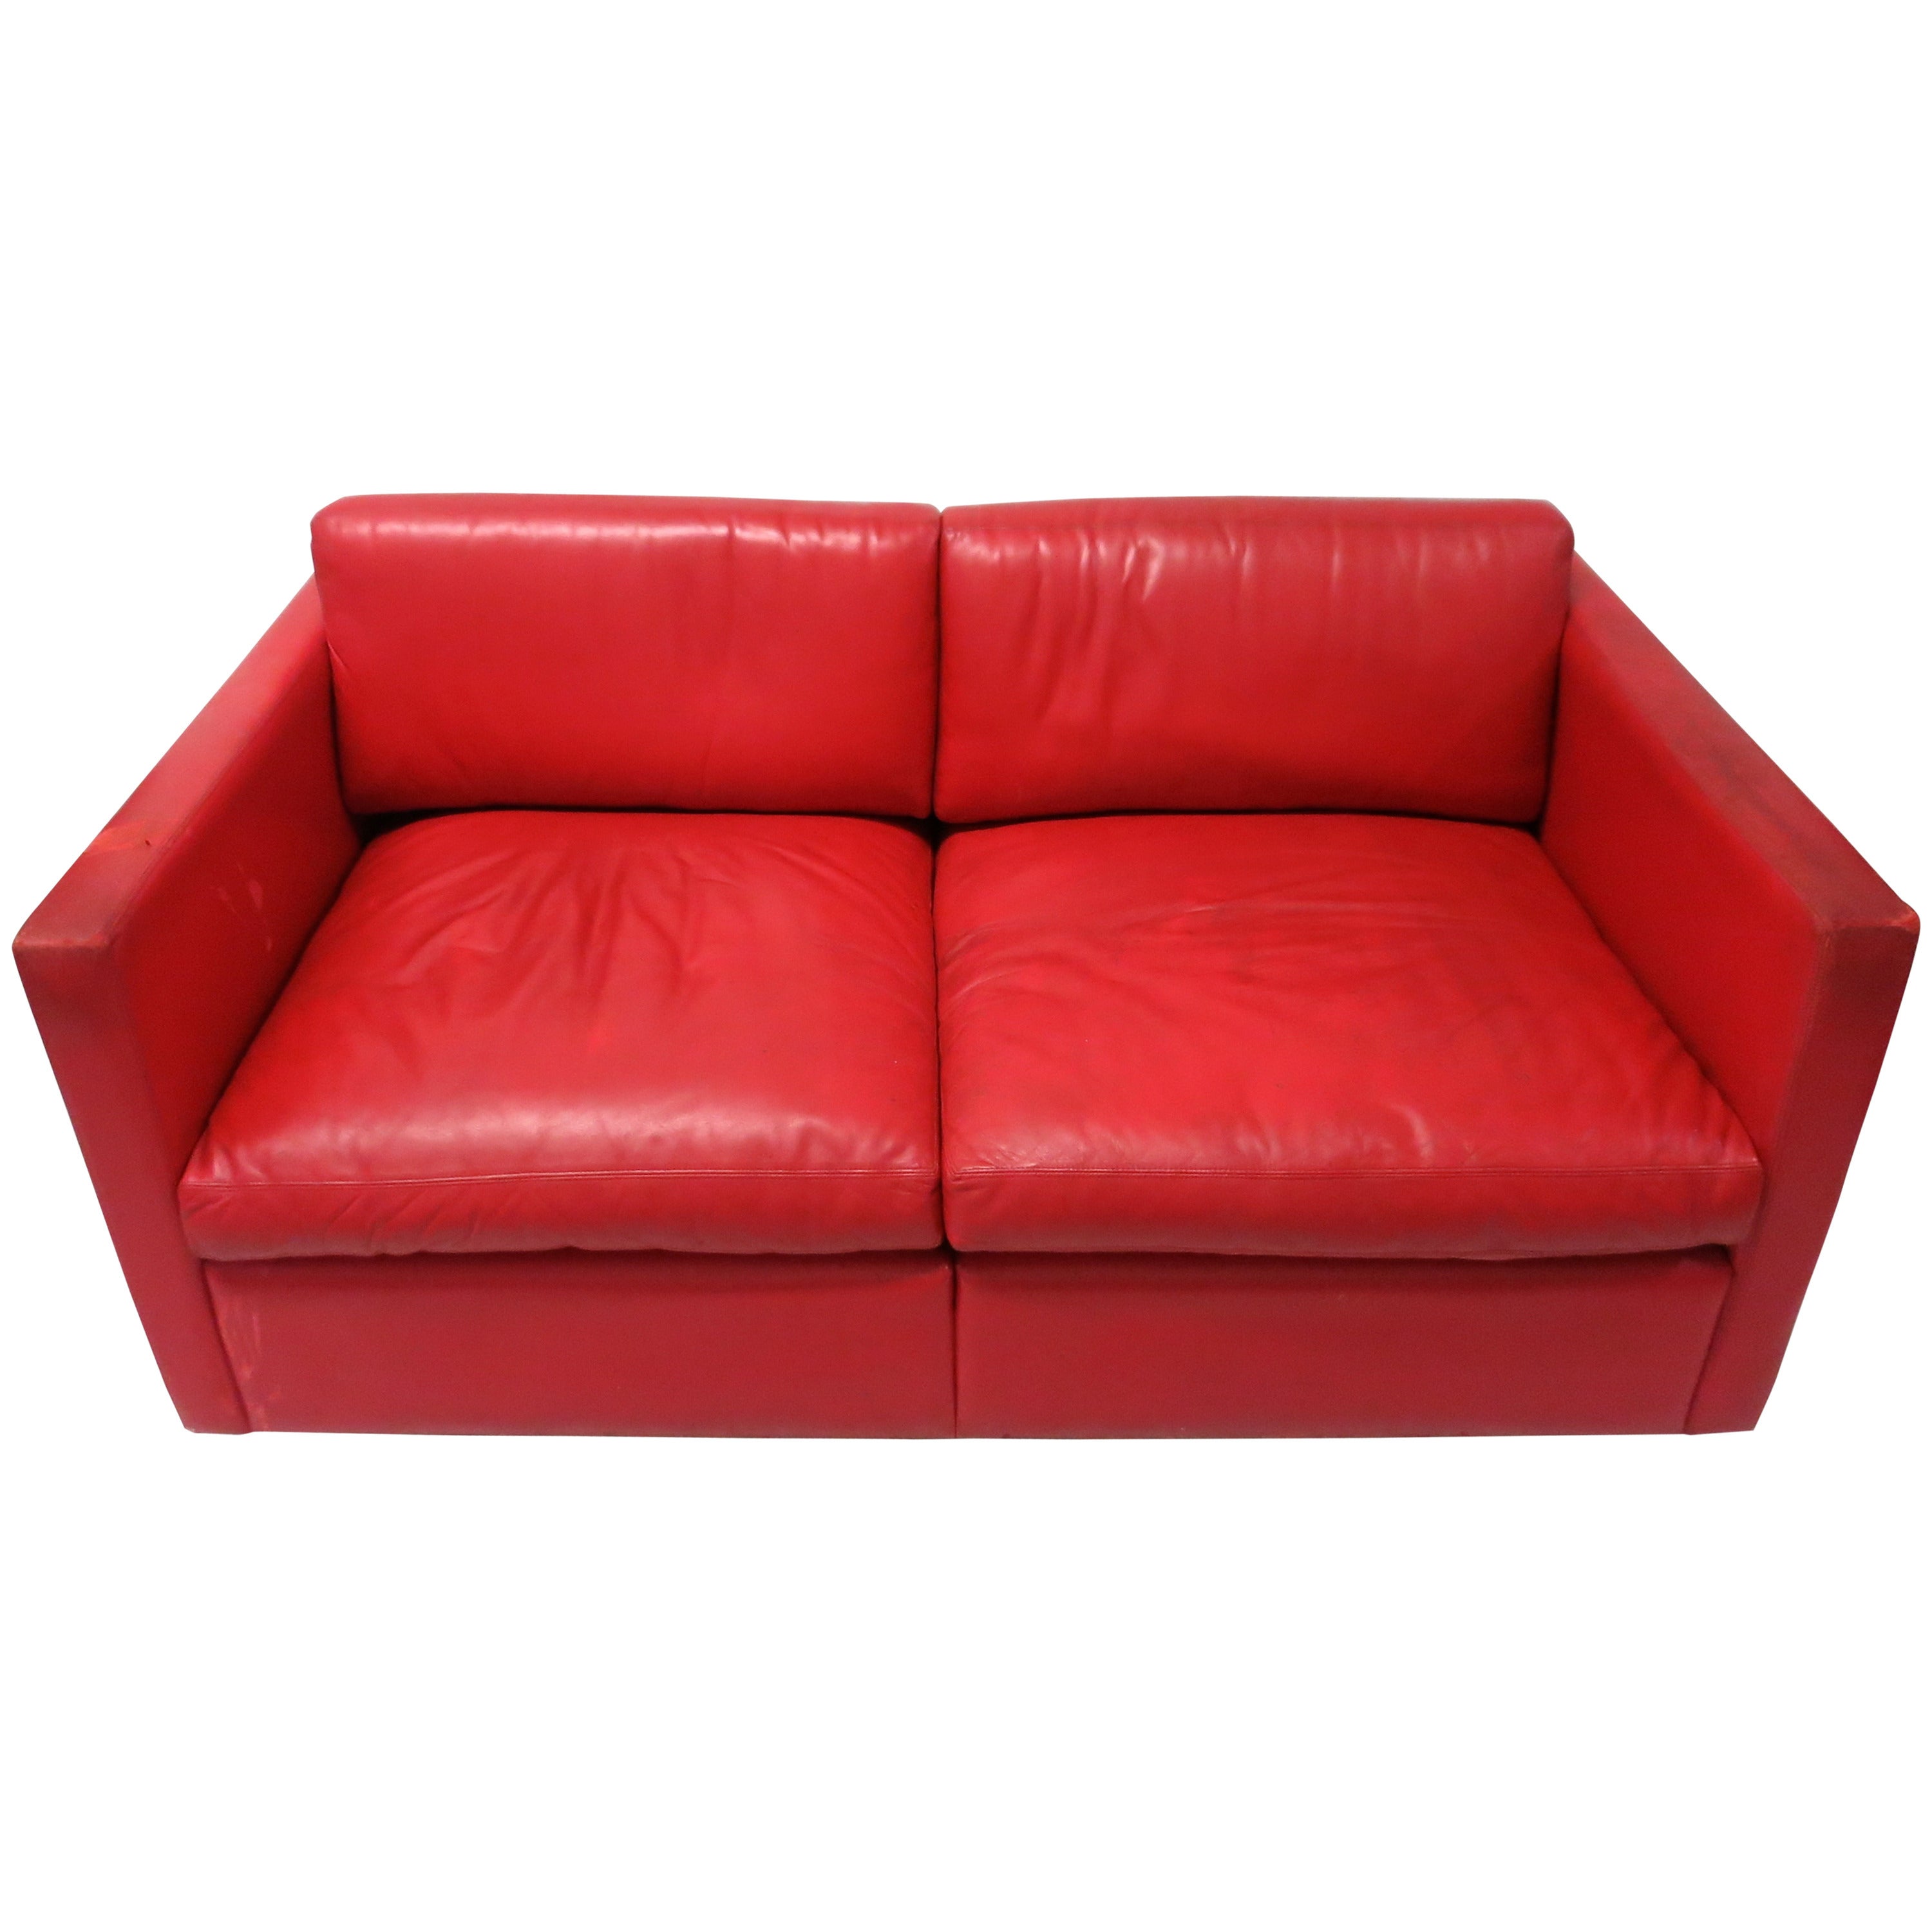 Red Leather Two Seater Sofa Circa 1970 Made in USA